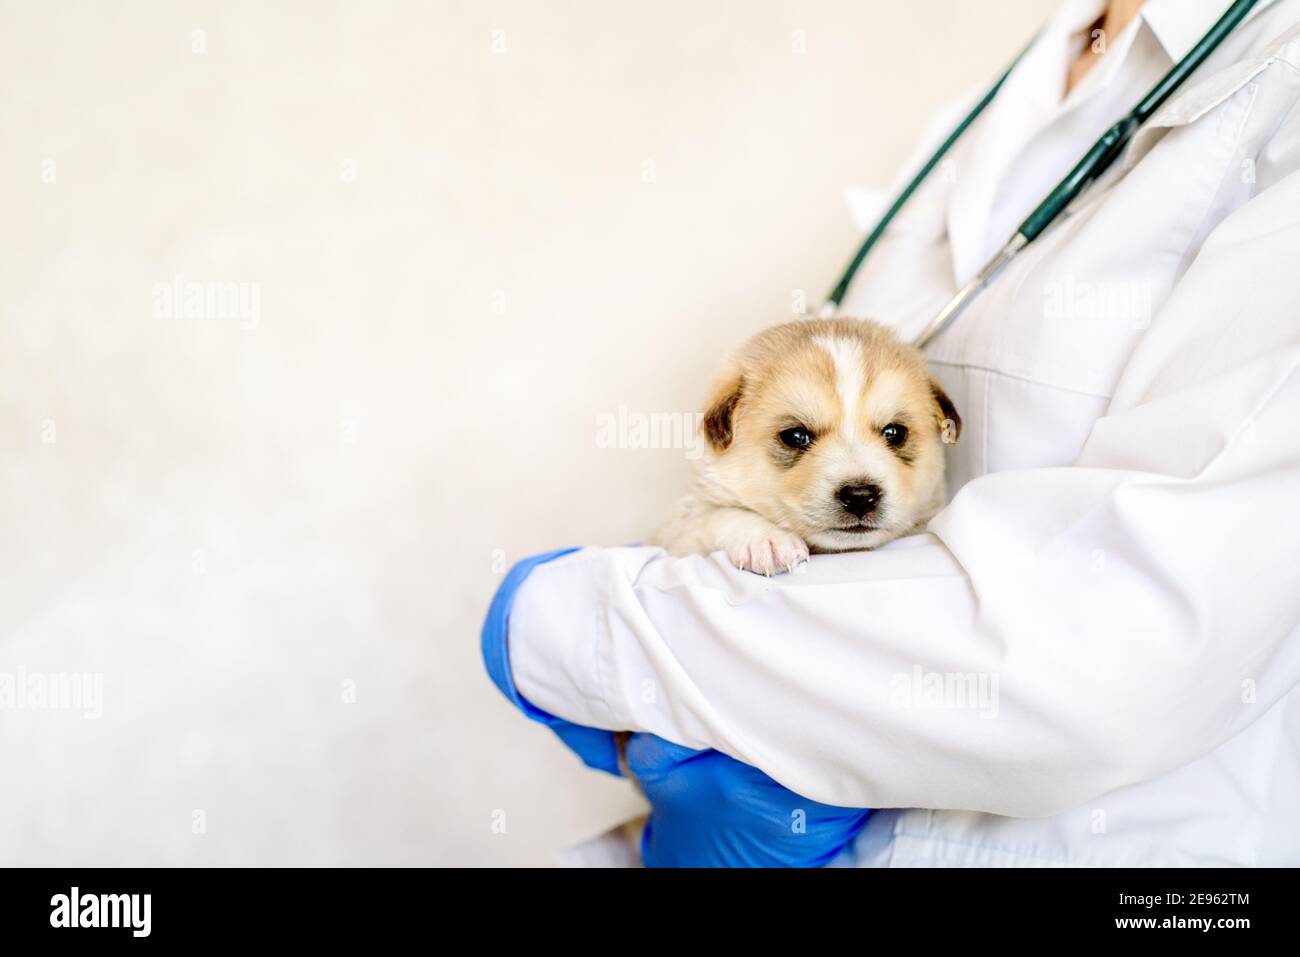 Puppy sleeps on the hand.care for a purebred dog. Day of the mutts July 31. In the hands of a vet doctor in the clinic. pet before vaccination. Stock Photo